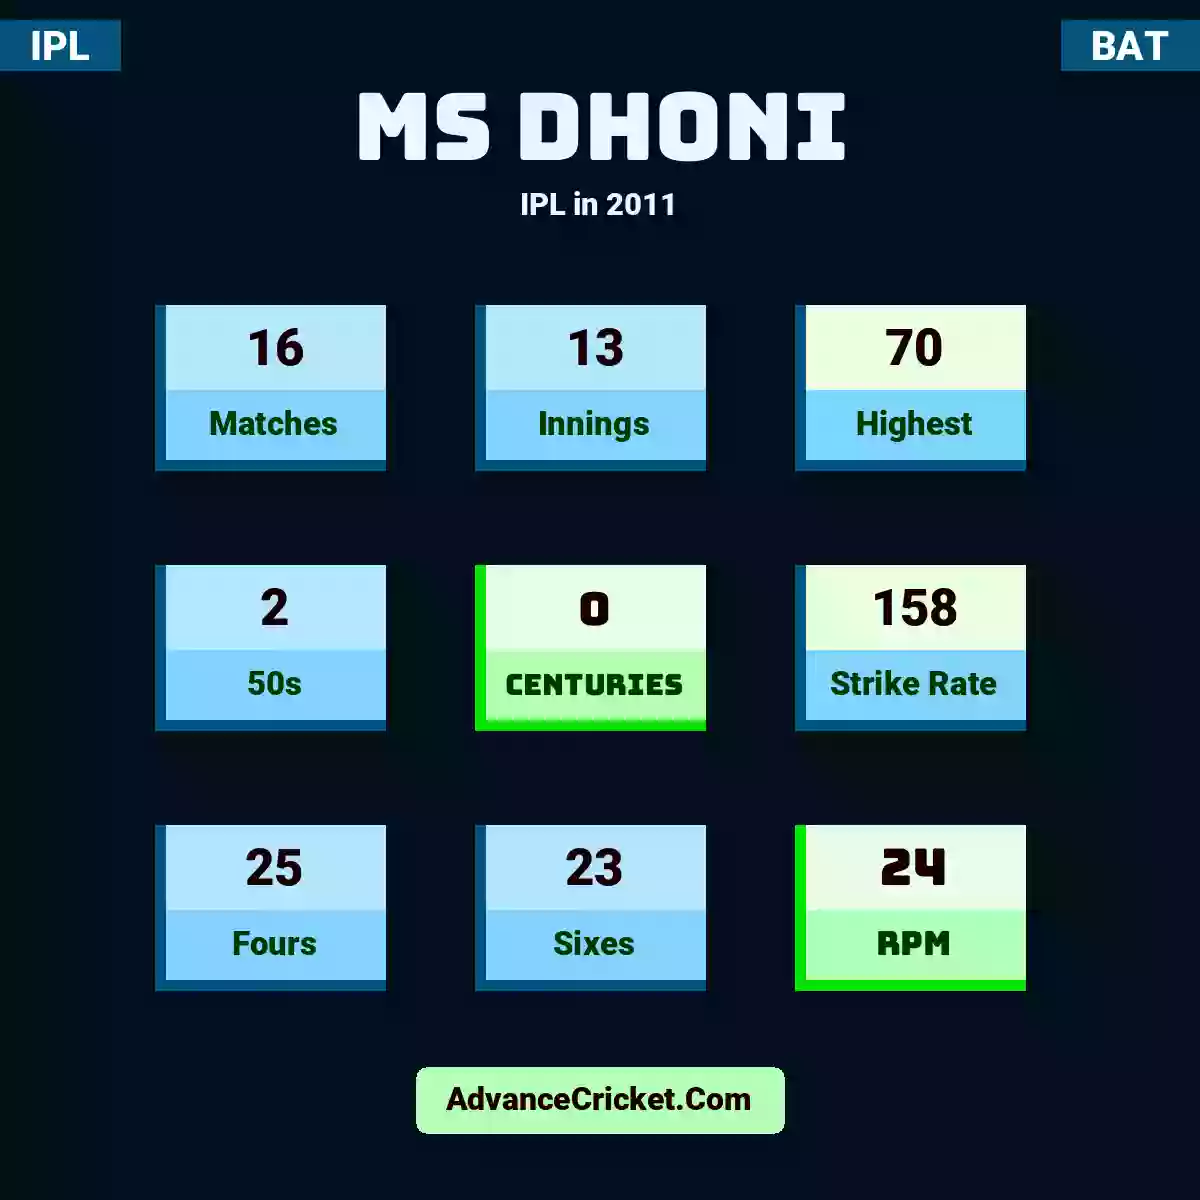 MS Dhoni IPL  in 2011, MS Dhoni played 16 matches, scored 70 runs as highest, 2 half-centuries, and 0 centuries, with a strike rate of 158. M.Dhoni hit 25 fours and 23 sixes, with an RPM of 24.